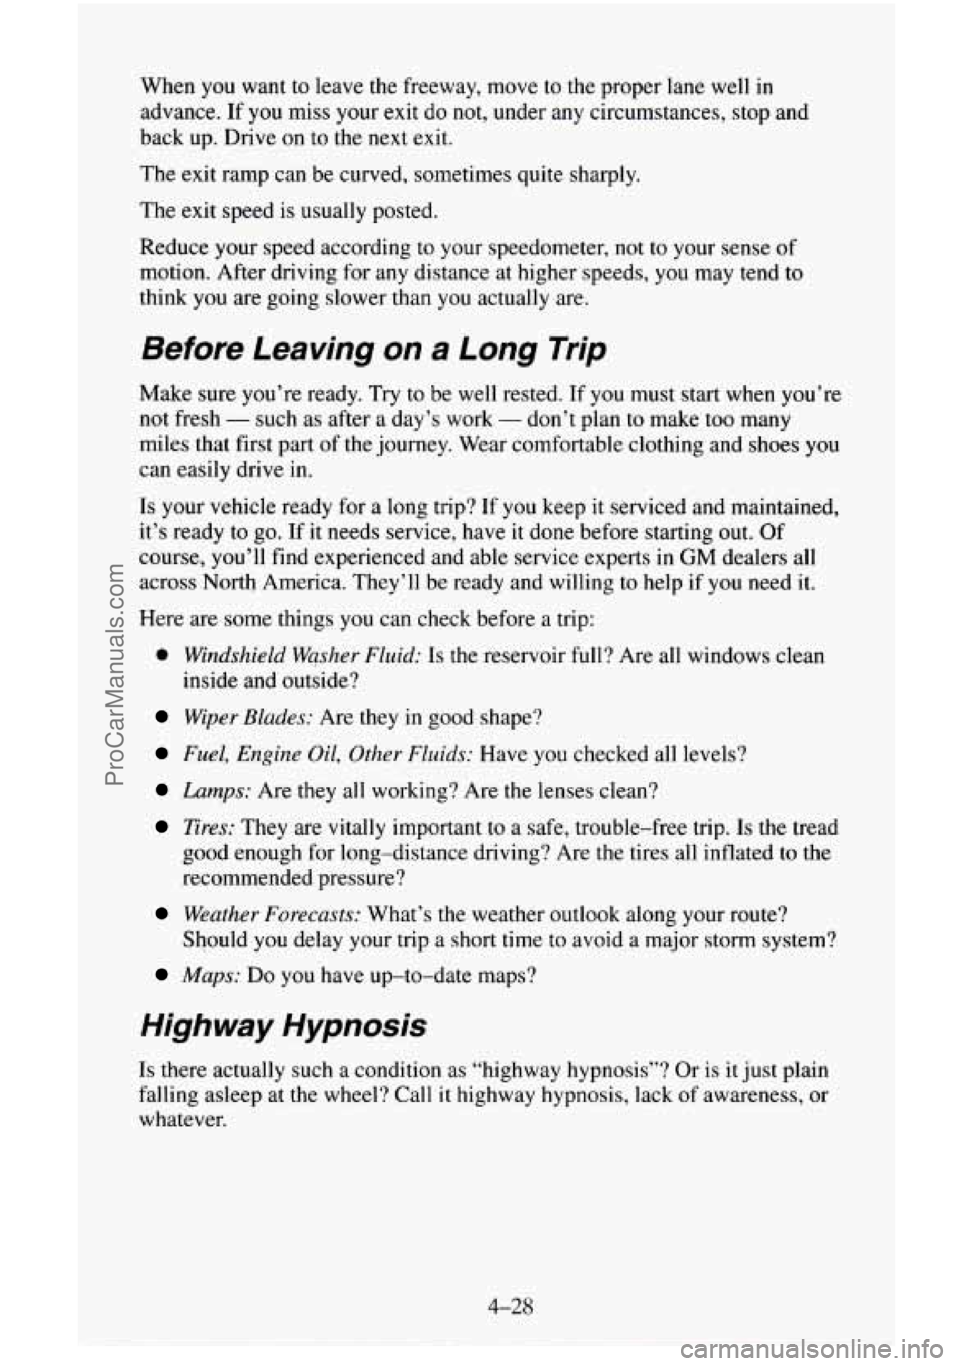 CHEVROLET SUBURBAN 1996  Owners Manual When you  want  to  leave the freeway, move  to  the proper lane well in 
advance. If you miss your exit do not,  under any circumstances,  stop and 
back  up.  Drive on  to the next exit. 
The  exit 